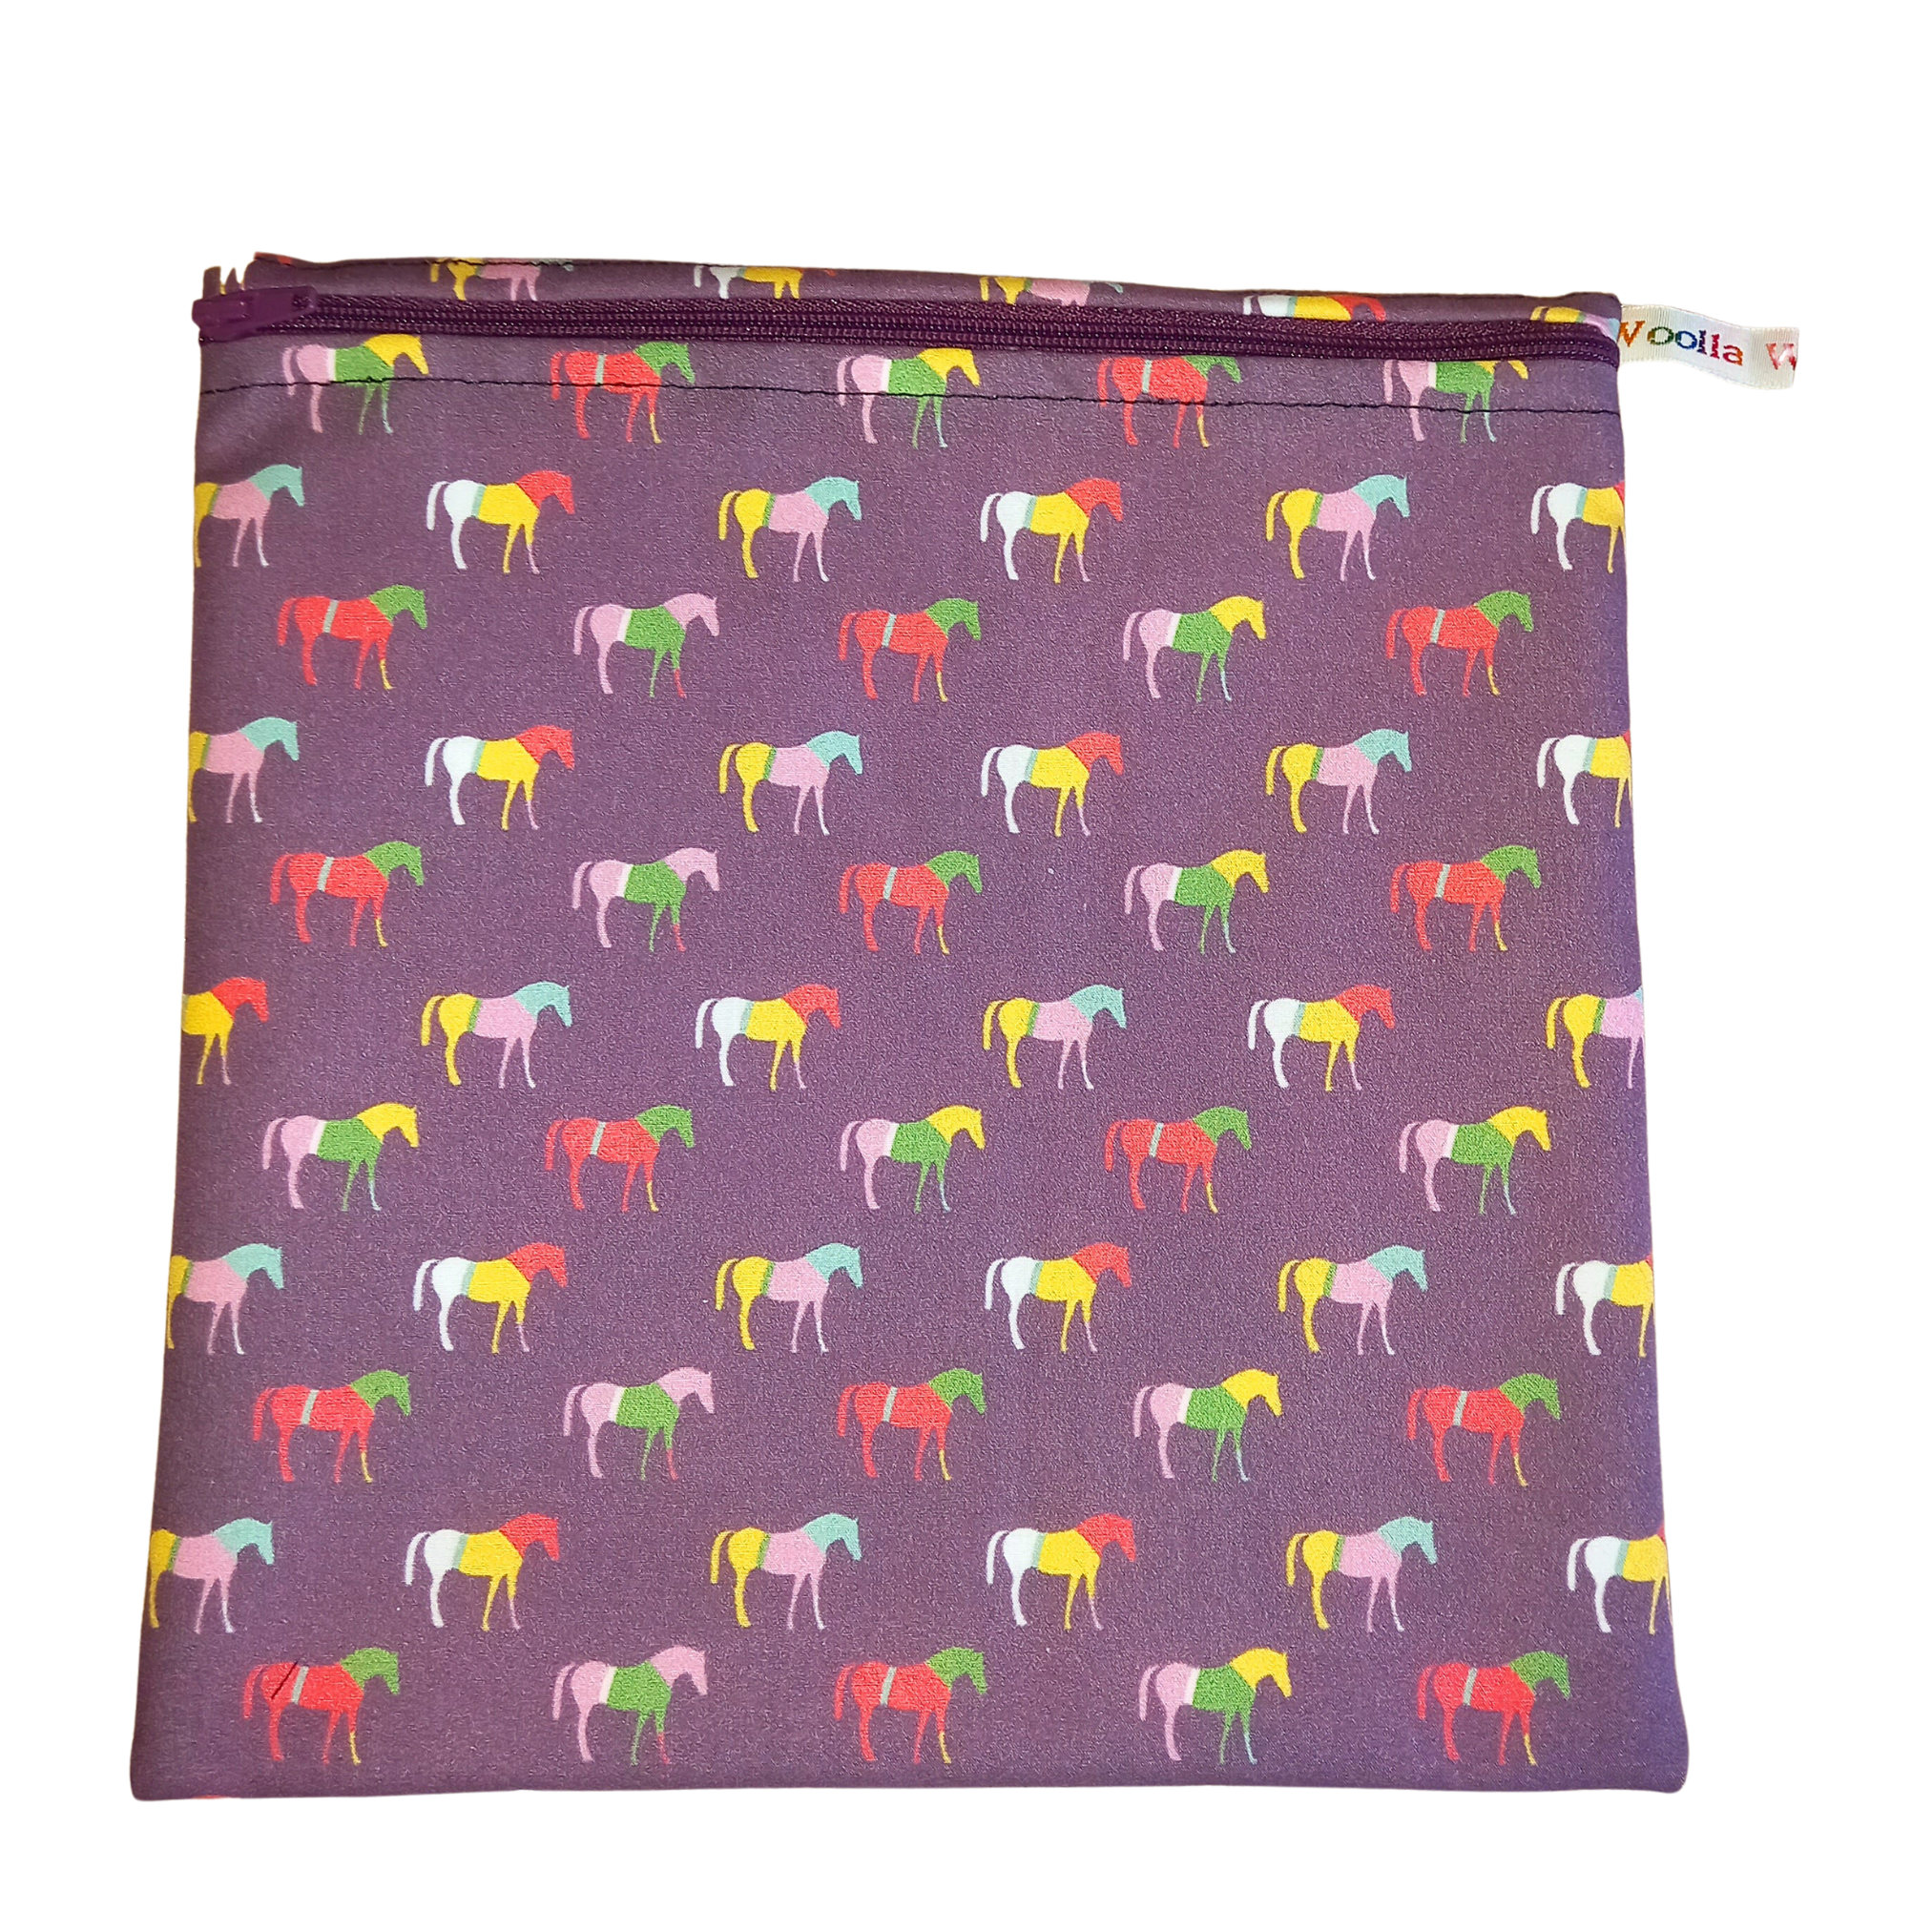 Plum Horses - Large Poppins Pouch - Waterproof, Washable, Food Safe, Vegan, Lined Zip Bag